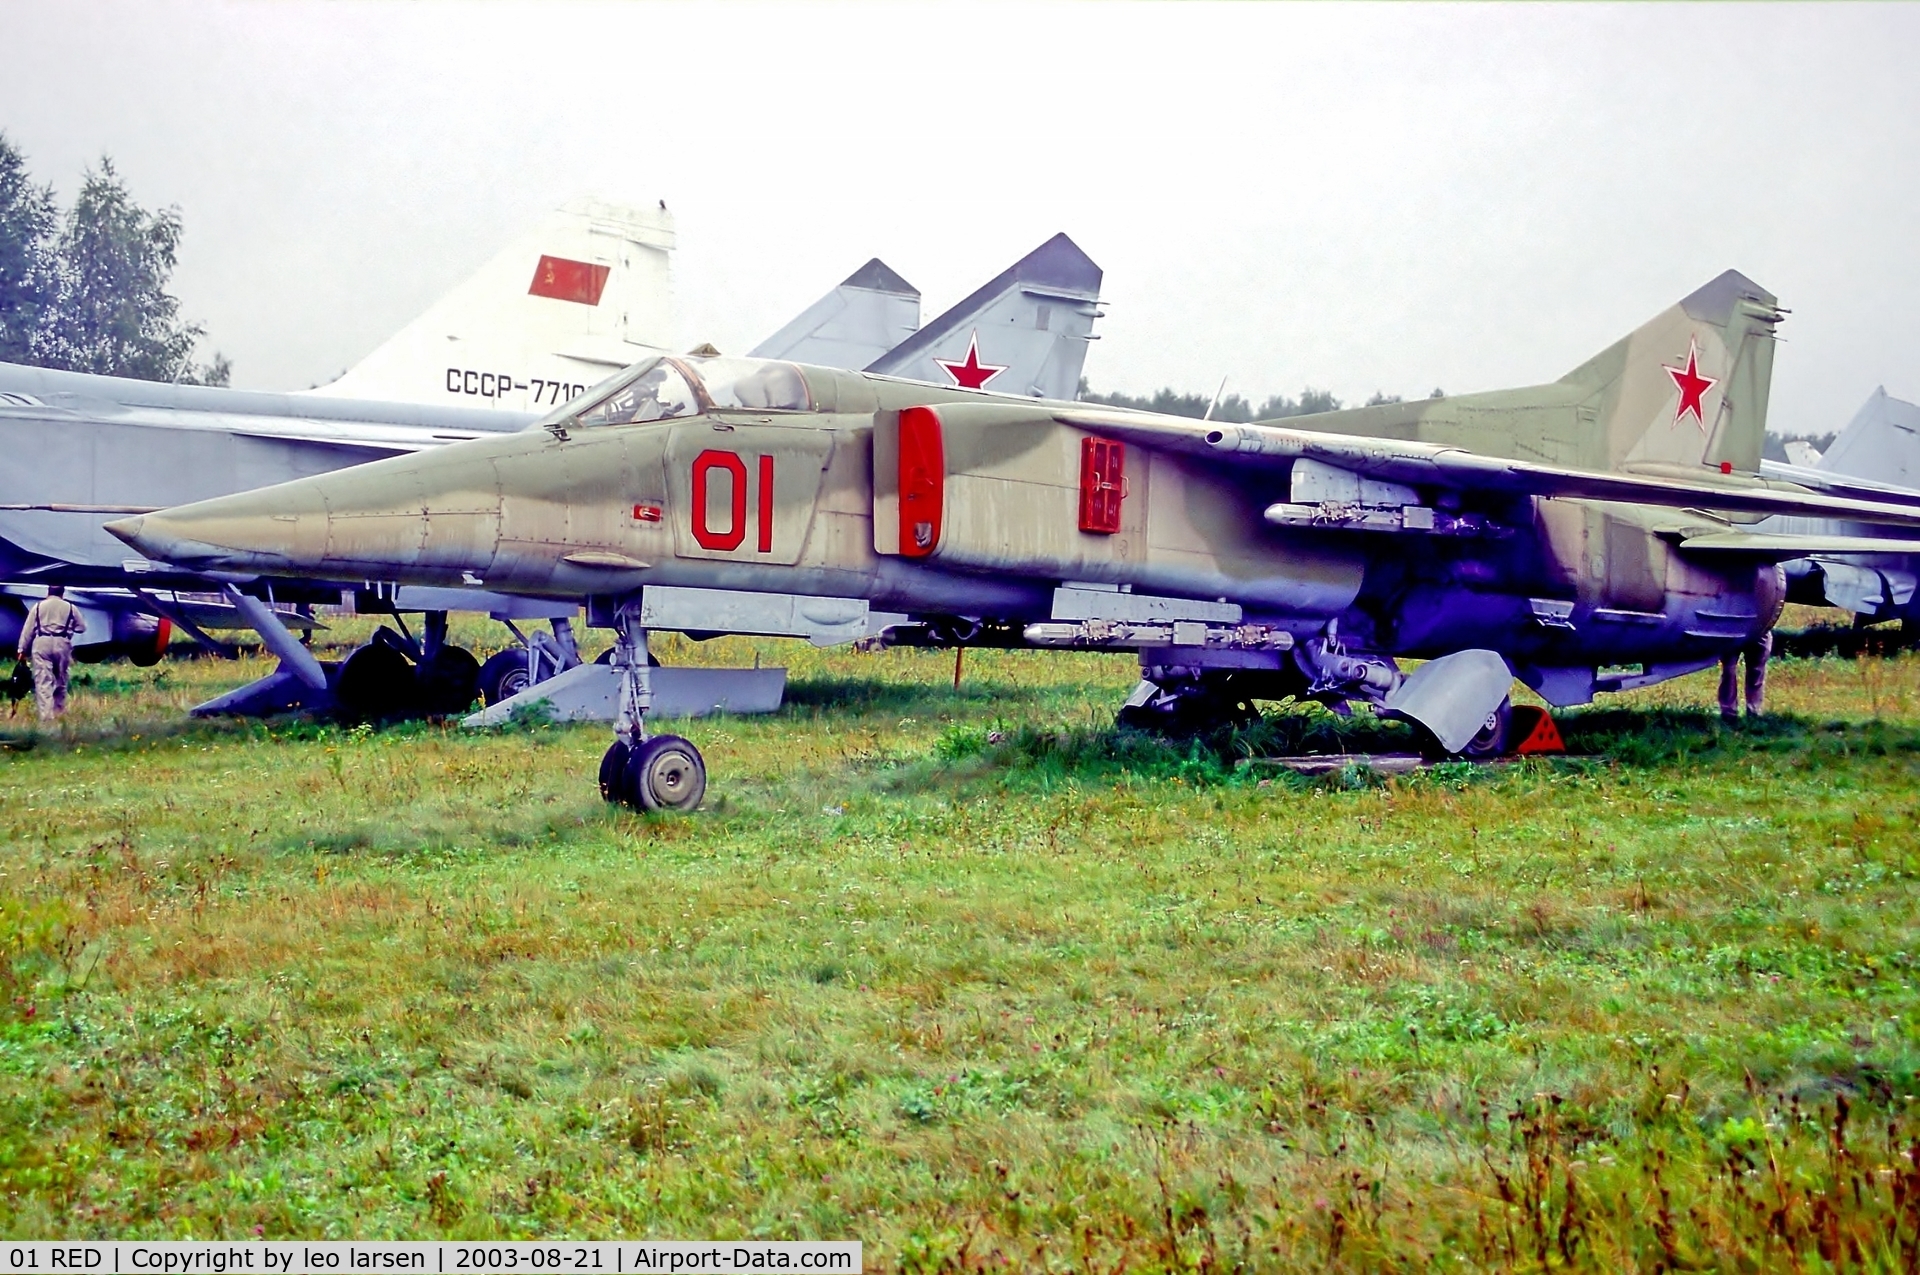 01 RED, 1974 Mikoyan-Gurevich MiG-27 C/N 61912511018, Monino Museum Moscow 21.8.03